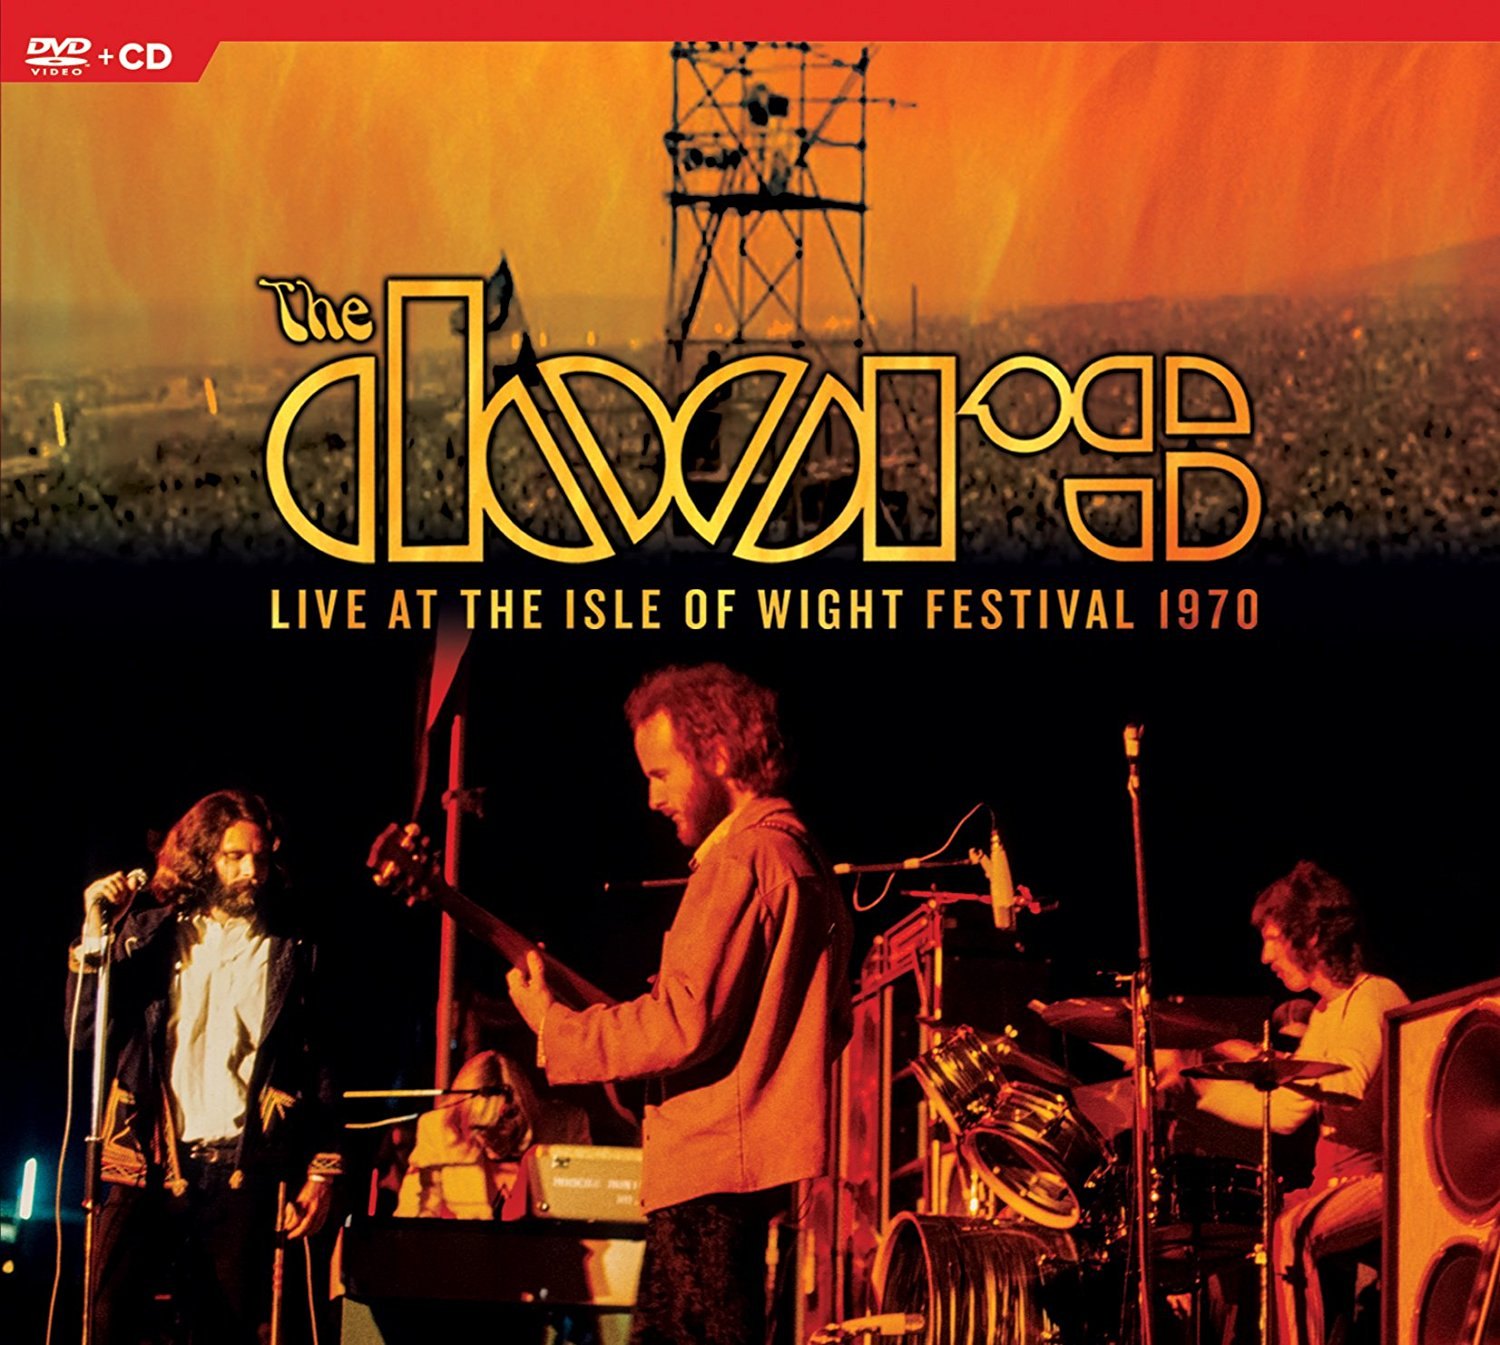 The Doors: Live at the Isle of Wight 1970 (DVD/CD)